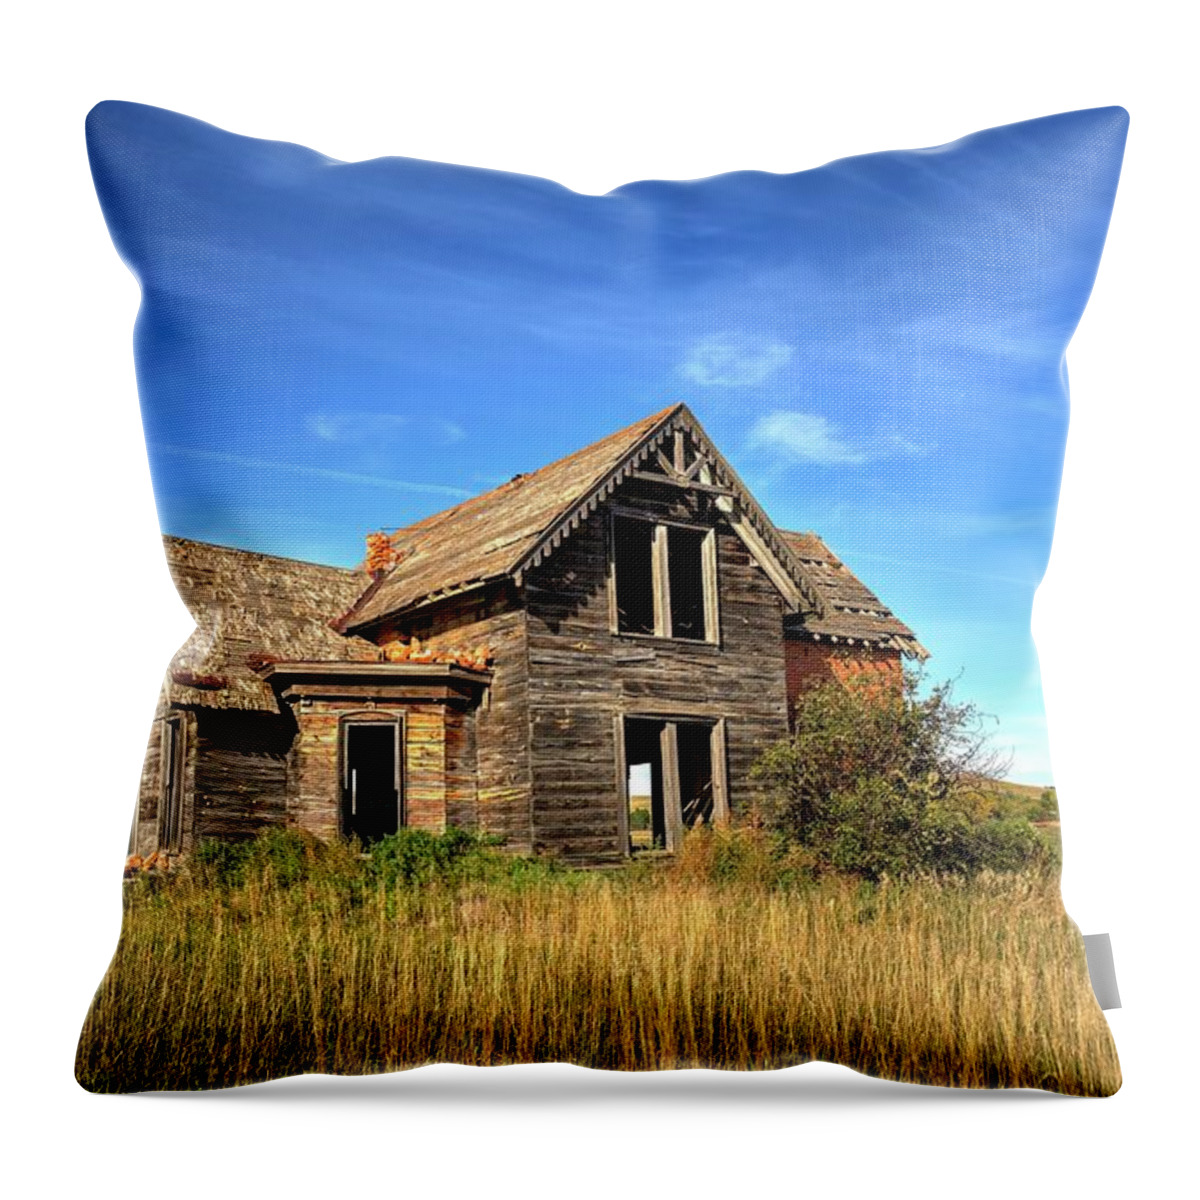 Abandoned Throw Pillow featuring the photograph Sims Show Place by Harriet Feagin